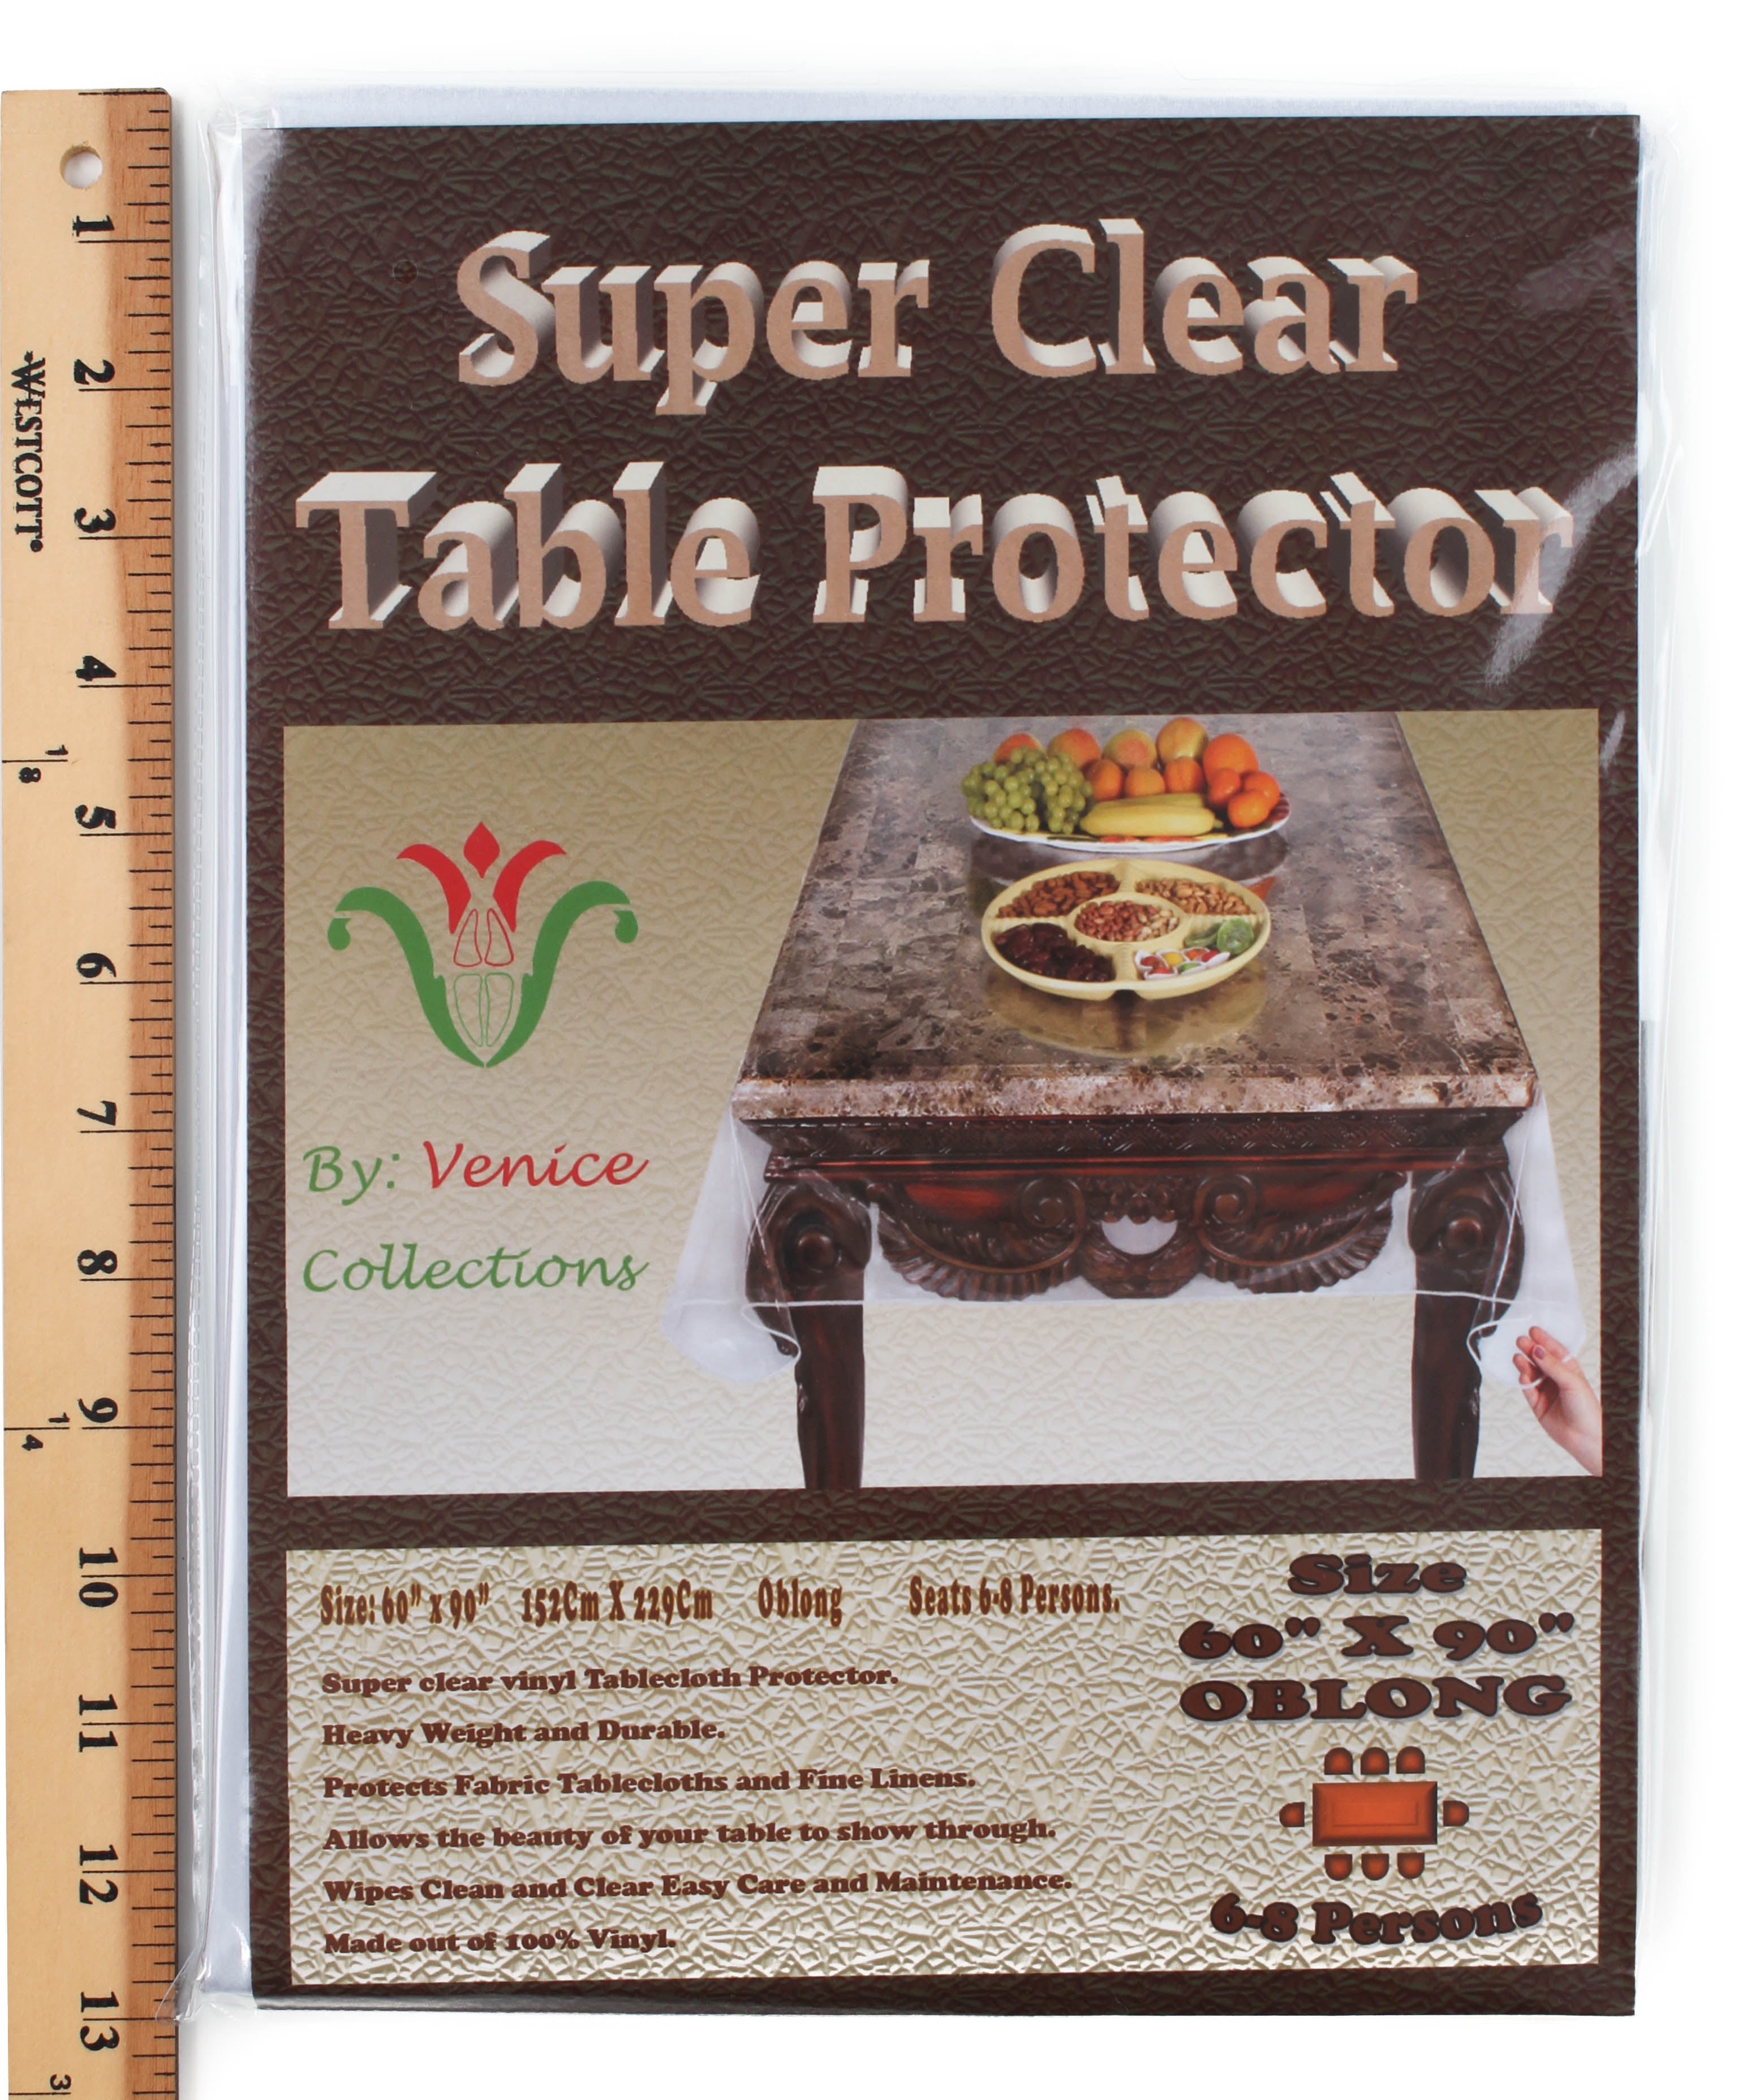 2 Mill Thick - Clear Plastic Tablecloth Roll- w/ Self Cutter -Wide Thick Disposable Table Cover Protects from Spills, Water, Oil, Stains. 2 Mill. T